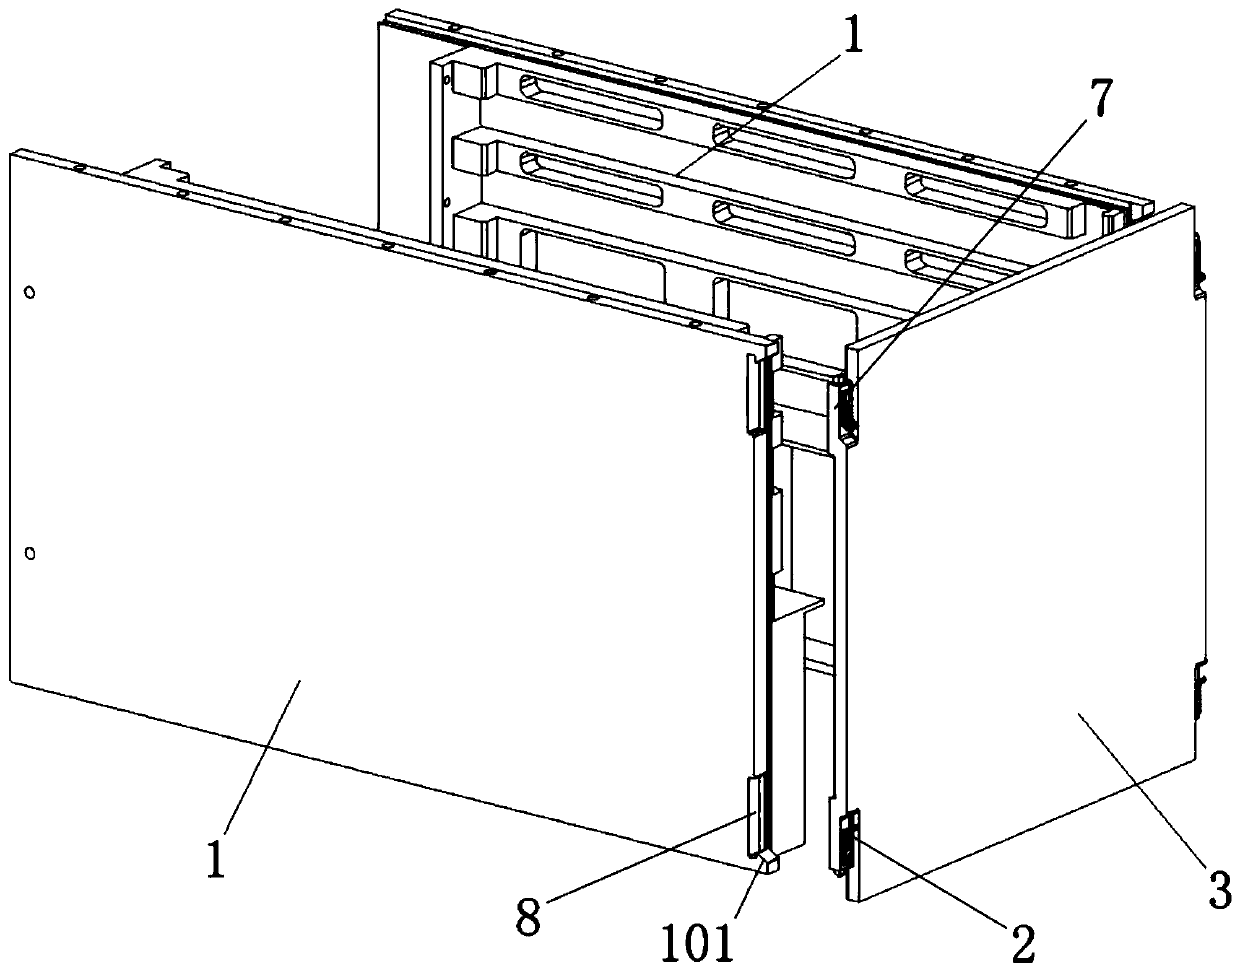 Quickly-dismountable-and-mountable case cover plate structure